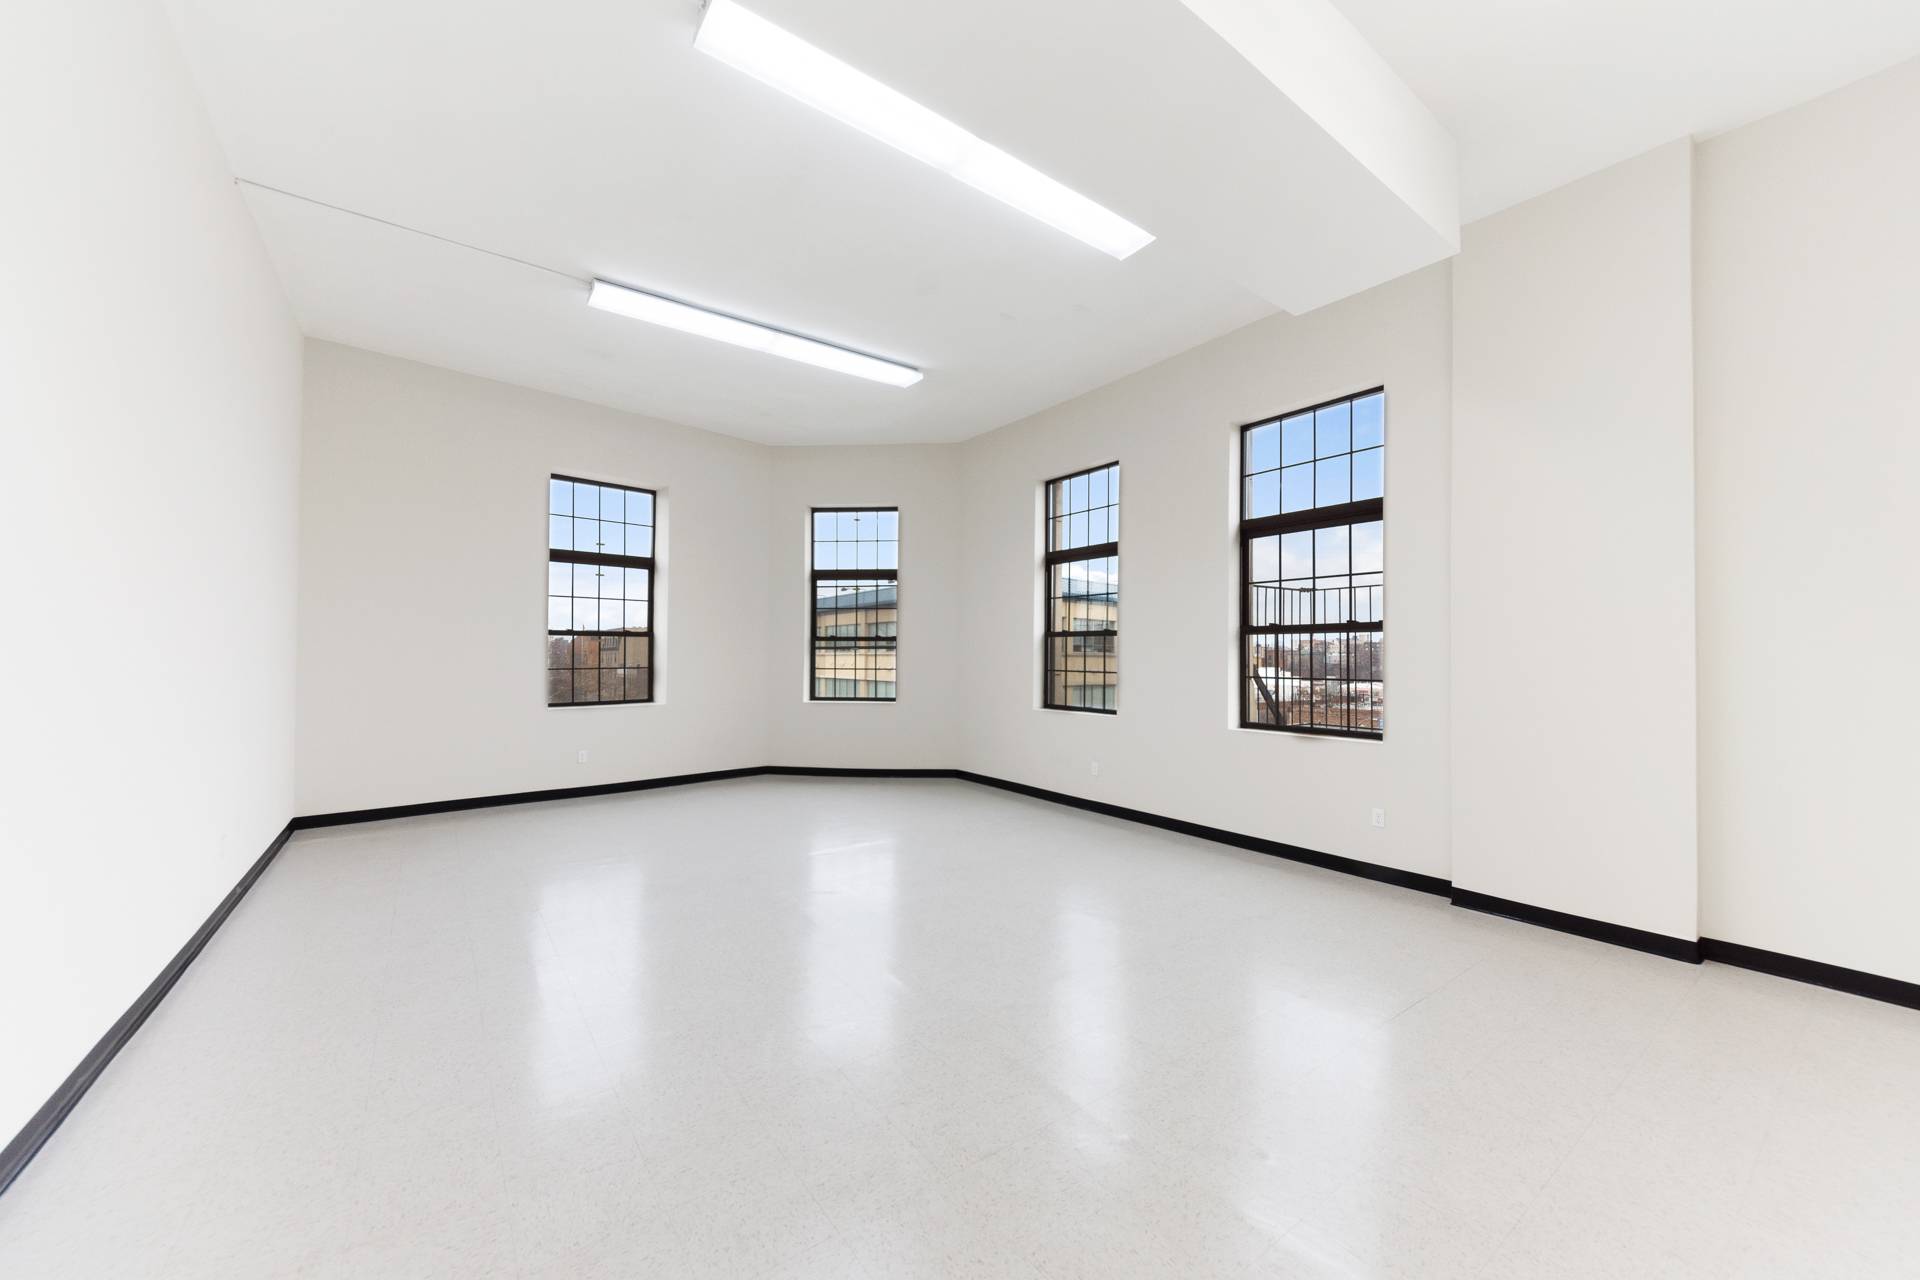 Bronx Commercial Lease: New Vanilla Box Executive Corner Office Suite